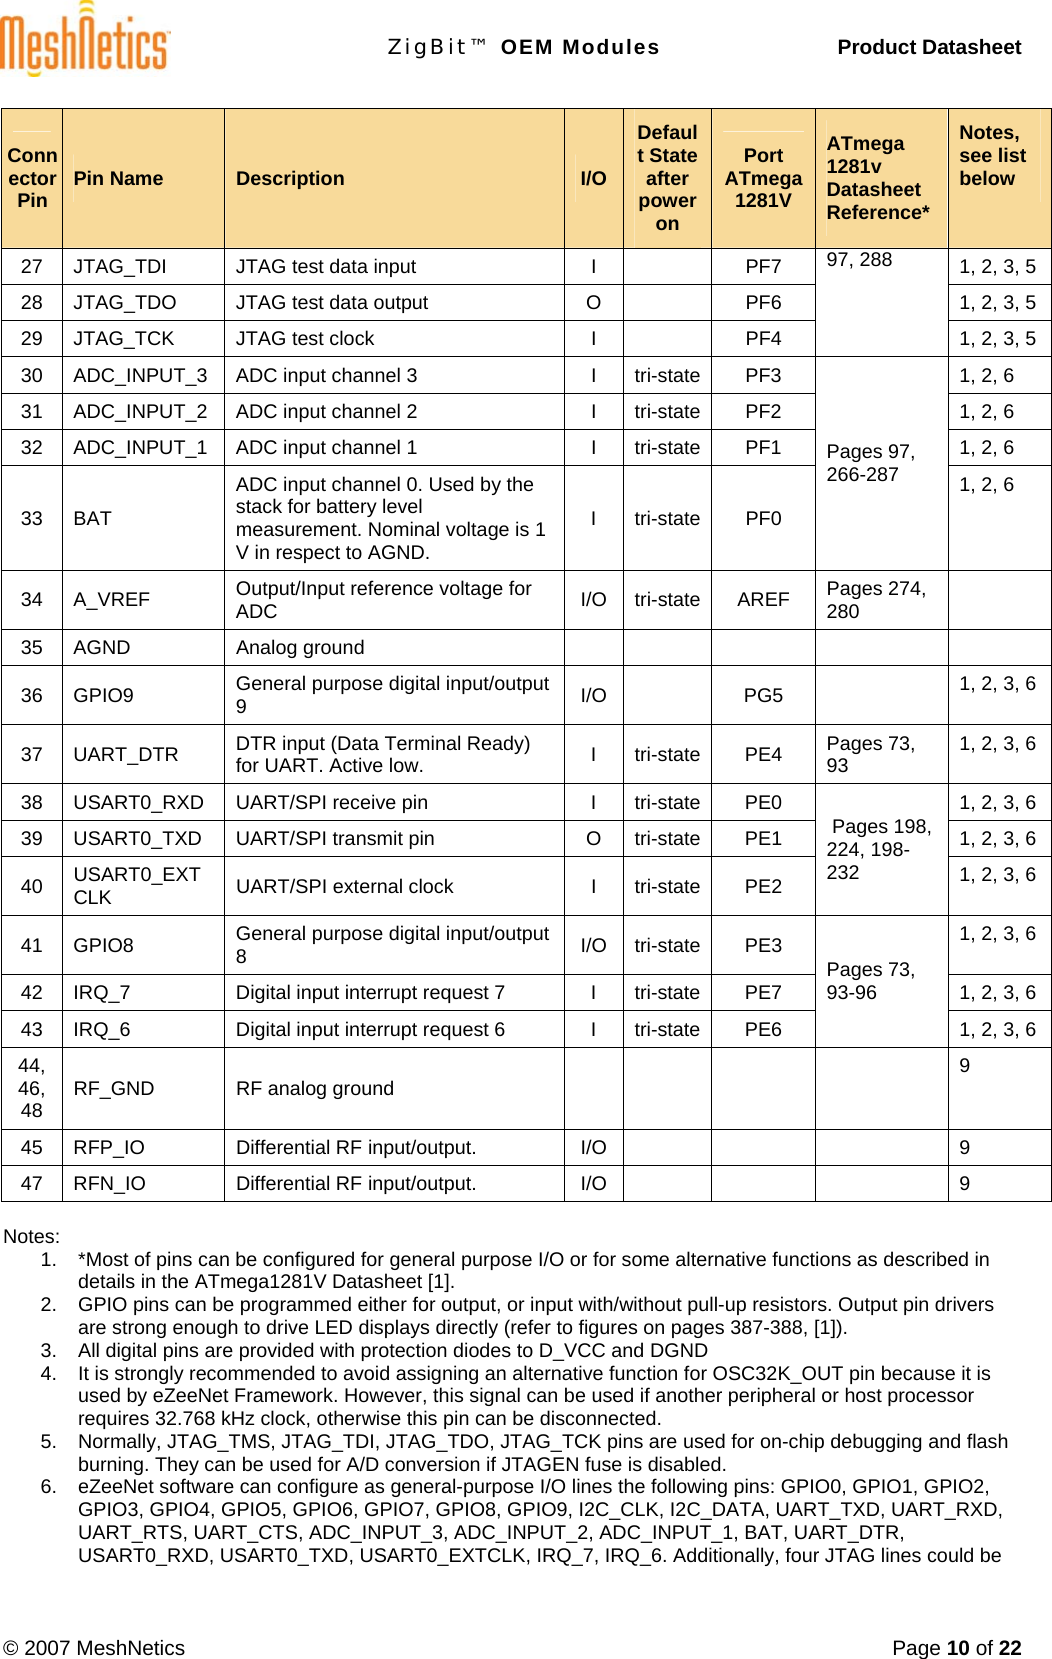 ZigBit™ OEM Modules     Product Datasheet  © 2007 MeshNetics  Page 10 of 22  Connector Pin  Pin Name  Description  I/O Default State after power on Port ATmega 1281V ATmega 1281v Datasheet Reference* Notes, see list below   27  JTAG_TDI  JTAG test data input  I    PF7  1, 2, 3, 5 28  JTAG_TDO  JTAG test data output  O    PF6  1, 2, 3, 5 29  JTAG_TCK  JTAG test clock  I    PF4 97, 288 1, 2, 3, 5 30  ADC_INPUT_3  ADC input channel 3  I  tri-state PF3  1, 2, 6 31  ADC_INPUT_2  ADC input channel 2  I  tri-state PF2  1, 2, 6 32  ADC_INPUT_1  ADC input channel 1  I  tri-state PF1  1, 2, 6 33 BAT ADC input channel 0. Used by the stack for battery level measurement. Nominal voltage is 1 V in respect to AGND. I tri-state PF0 Pages 97, 266-287  1, 2, 6 34 A_VREF  Output/Input reference voltage for ADC  I/O tri-state AREF  Pages 274, 280   35 AGND  Analog ground            36 GPIO9  General purpose digital input/output 9  I/O   PG5    1, 2, 3, 6 37 UART_DTR  DTR input (Data Terminal Ready) for UART. Active low.  I tri-state PE4  Pages 73, 93  1, 2, 3, 6 38  USART0_RXD  UART/SPI receive pin  I  tri-state PE0  1, 2, 3, 6 39 USART0_TXD  UART/SPI transmit pin  O tri-state PE1  1, 2, 3, 6 40  USART0_EXTCLK  UART/SPI external clock  I  tri-state PE2  Pages 198, 224, 198-232  1, 2, 3, 6 41 GPIO8  General purpose digital input/output 8  I/O tri-state PE3  1, 2, 3, 6 42  IRQ_7  Digital input interrupt request 7  I  tri-state PE7  1, 2, 3, 6 43  IRQ_6  Digital input interrupt request 6  I  tri-state PE6 Pages 73, 93-96 1, 2, 3, 6 44, 46, 48  RF_GND  RF analog ground        9 45 RFP_IO  Differential RF input/output.  I/O       9 47 RFN_IO  Differential RF input/output.  I/O       9  Notes: 1.  *Most of pins can be configured for general purpose I/O or for some alternative functions as described in details in the ATmega1281V Datasheet [1].  2.  GPIO pins can be programmed either for output, or input with/without pull-up resistors. Output pin drivers are strong enough to drive LED displays directly (refer to figures on pages 387-388, [1]).  3.  All digital pins are provided with protection diodes to D_VCC and DGND  4.  It is strongly recommended to avoid assigning an alternative function for OSC32K_OUT pin because it is used by eZeeNet Framework. However, this signal can be used if another peripheral or host processor requires 32.768 kHz clock, otherwise this pin can be disconnected. 5.  Normally, JTAG_TMS, JTAG_TDI, JTAG_TDO, JTAG_TCK pins are used for on-chip debugging and flash burning. They can be used for A/D conversion if JTAGEN fuse is disabled. 6.  eZeeNet software can configure as general-purpose I/O lines the following pins: GPIO0, GPIO1, GPIO2, GPIO3, GPIO4, GPIO5, GPIO6, GPIO7, GPIO8, GPIO9, I2C_CLK, I2C_DATA, UART_TXD, UART_RXD, UART_RTS, UART_CTS, ADC_INPUT_3, ADC_INPUT_2, ADC_INPUT_1, BAT, UART_DTR, USART0_RXD, USART0_TXD, USART0_EXTCLK, IRQ_7, IRQ_6. Additionally, four JTAG lines could be 